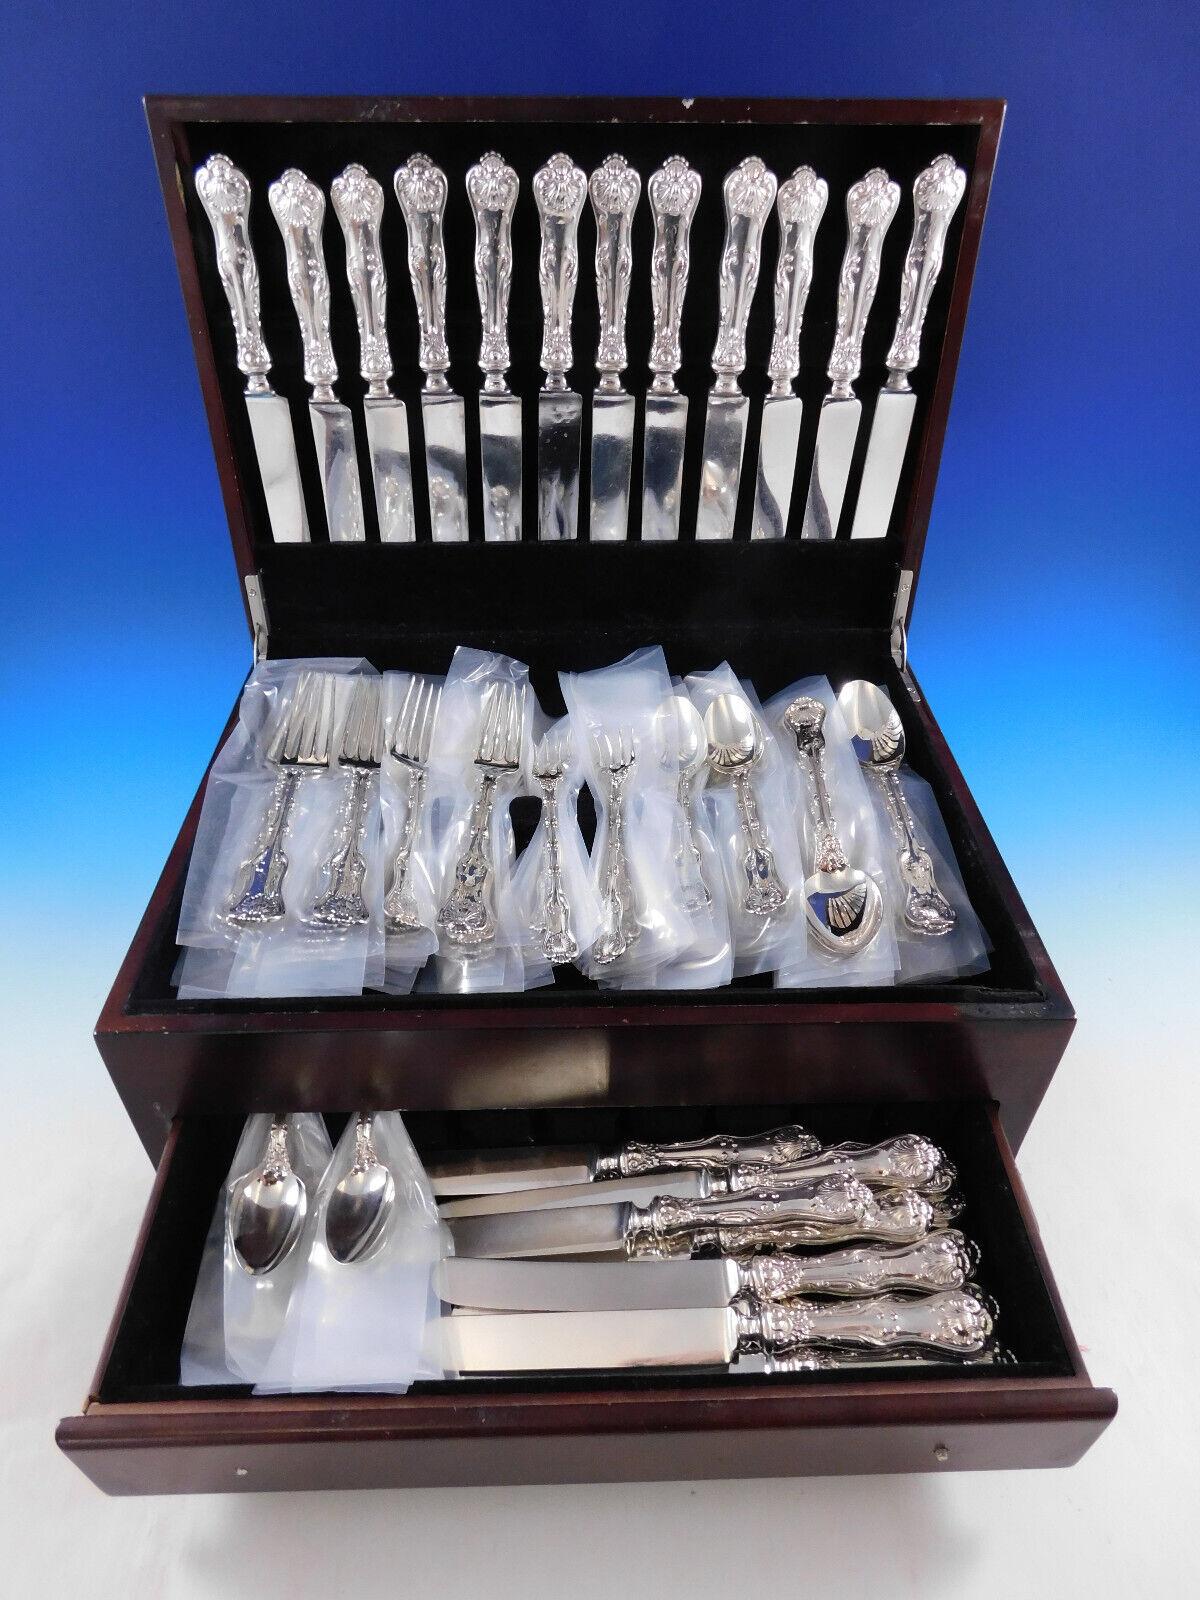 Dinner and Luncheon Size Imperial Queen by Whiting Sterling Silver Flatware set with classic shell motif - 96 pieces. This set includes:

12 Dinner Size Knives, 9 1/2